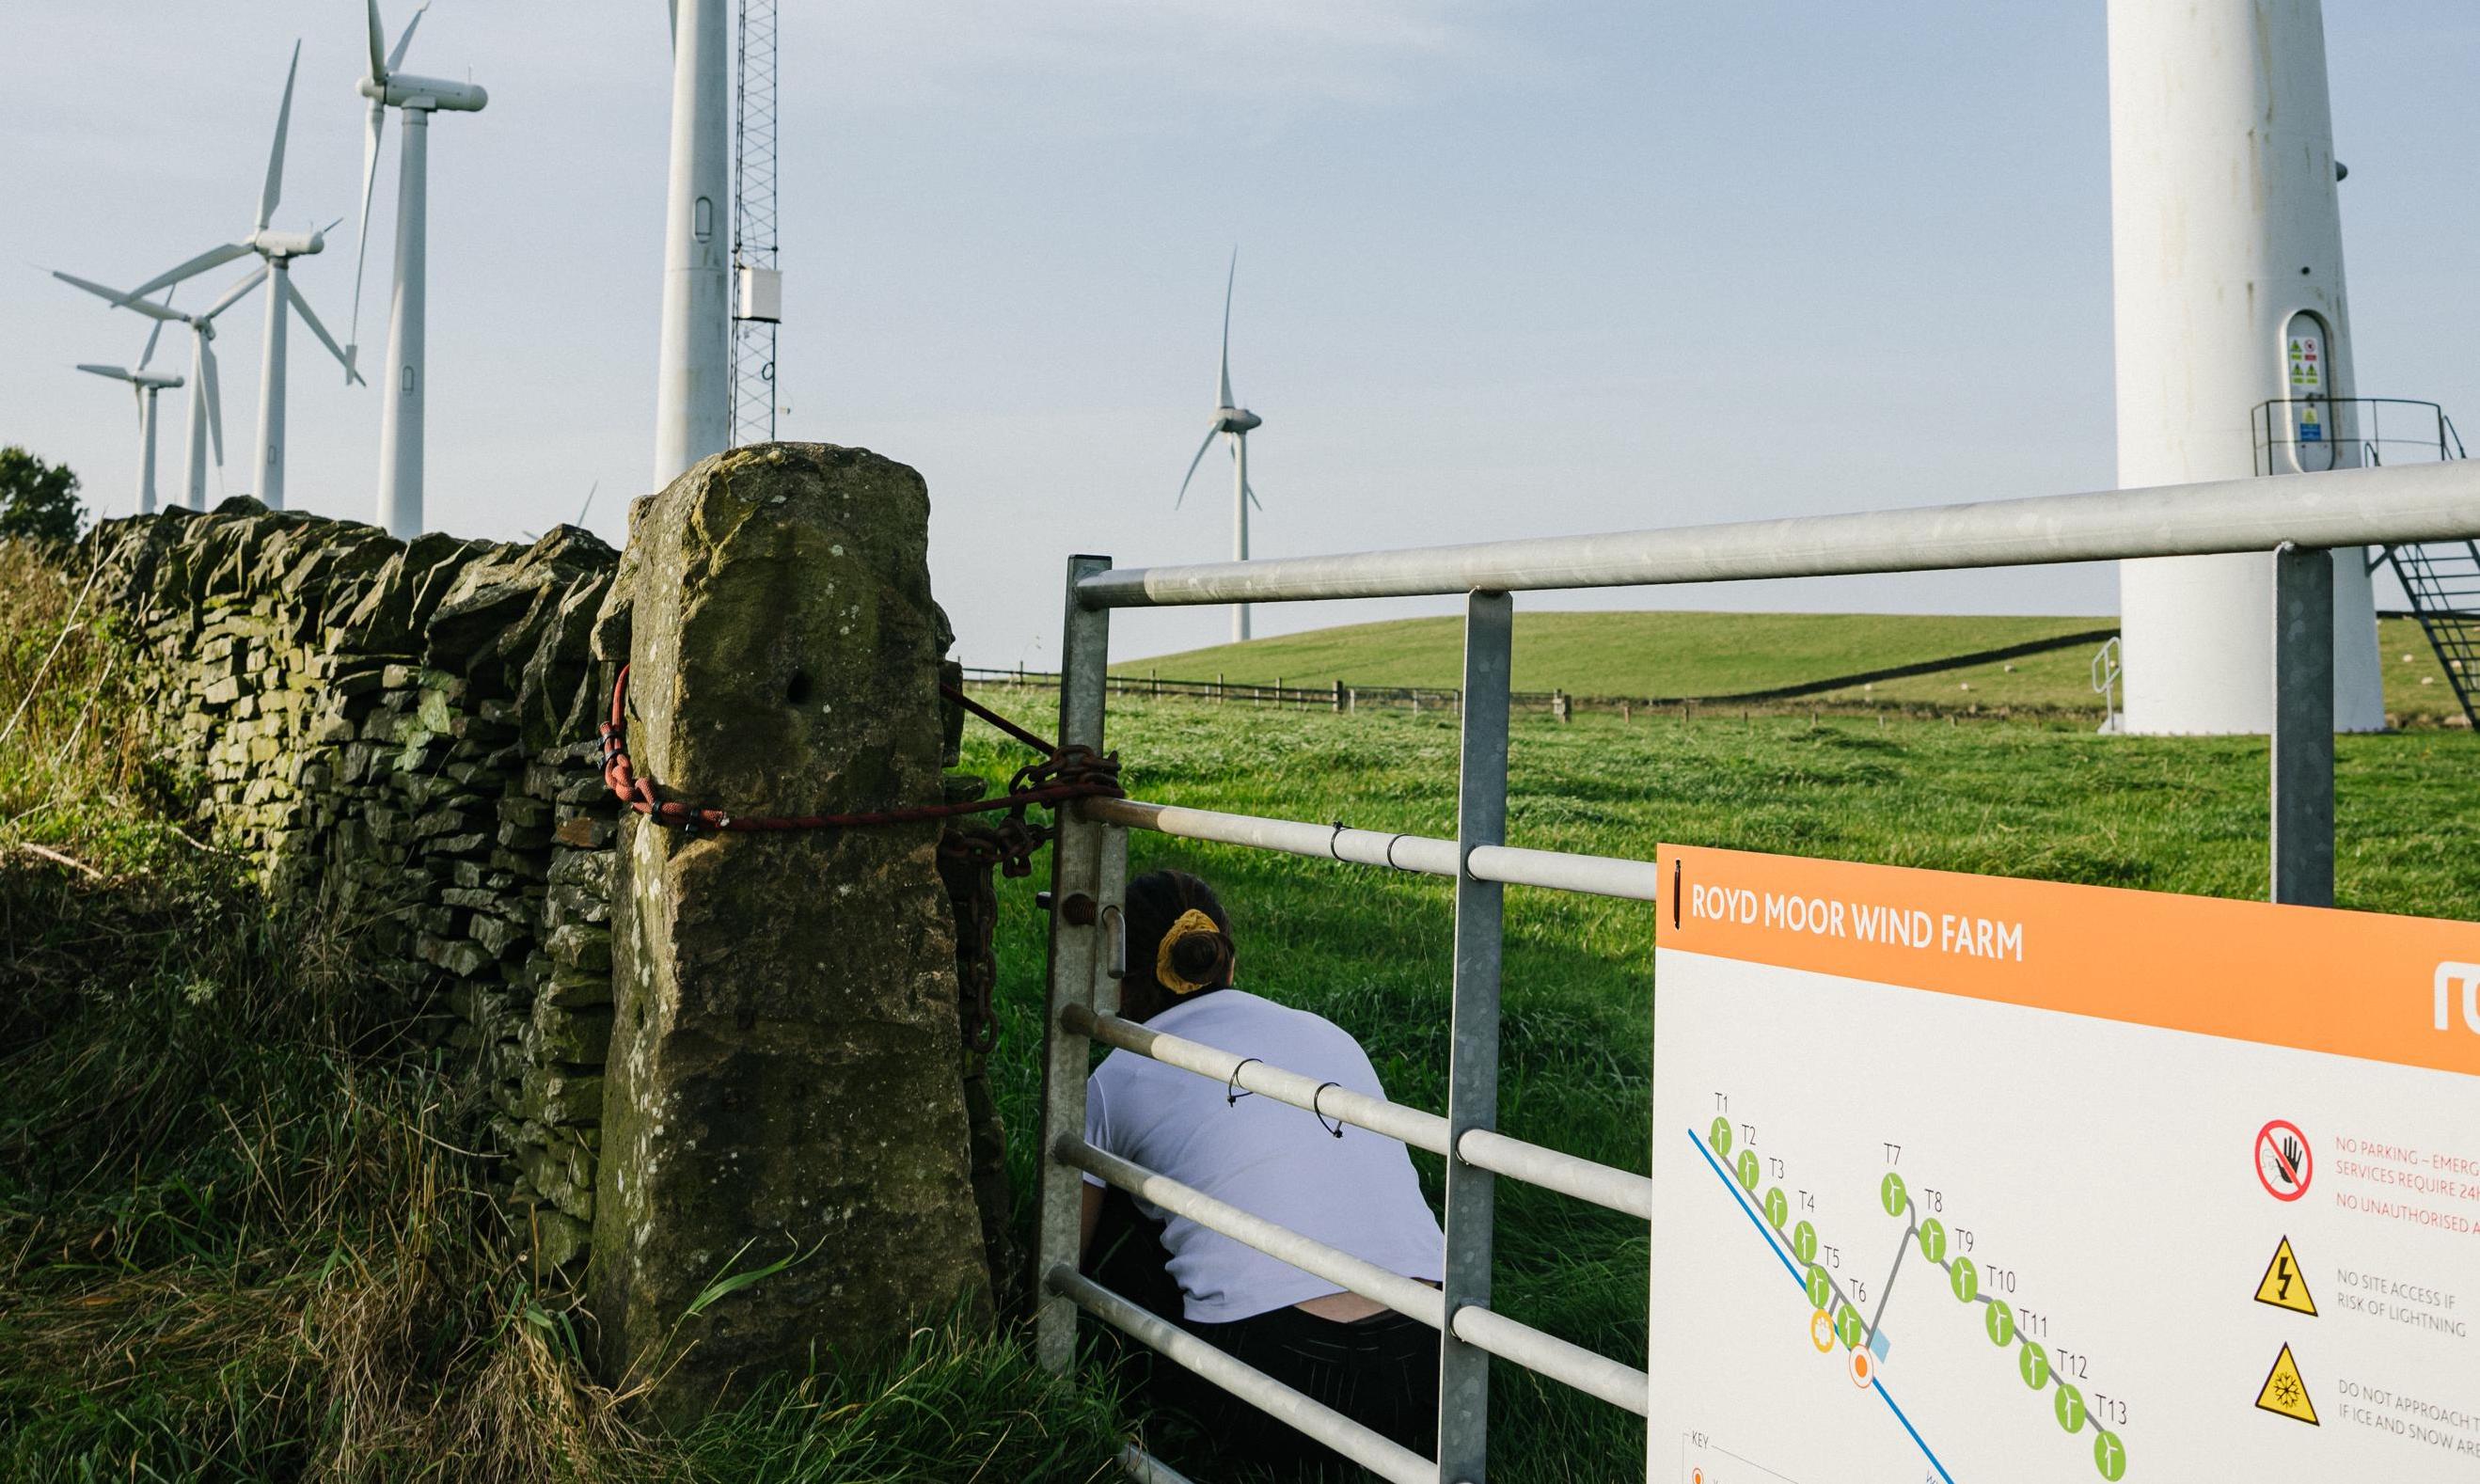 Composer Sara Rahman crouches just inside the gate of a wind farm in Yorkshire. The wind turbines are visible in the image and span a lush green pasture bordered by a jagged stone wall.